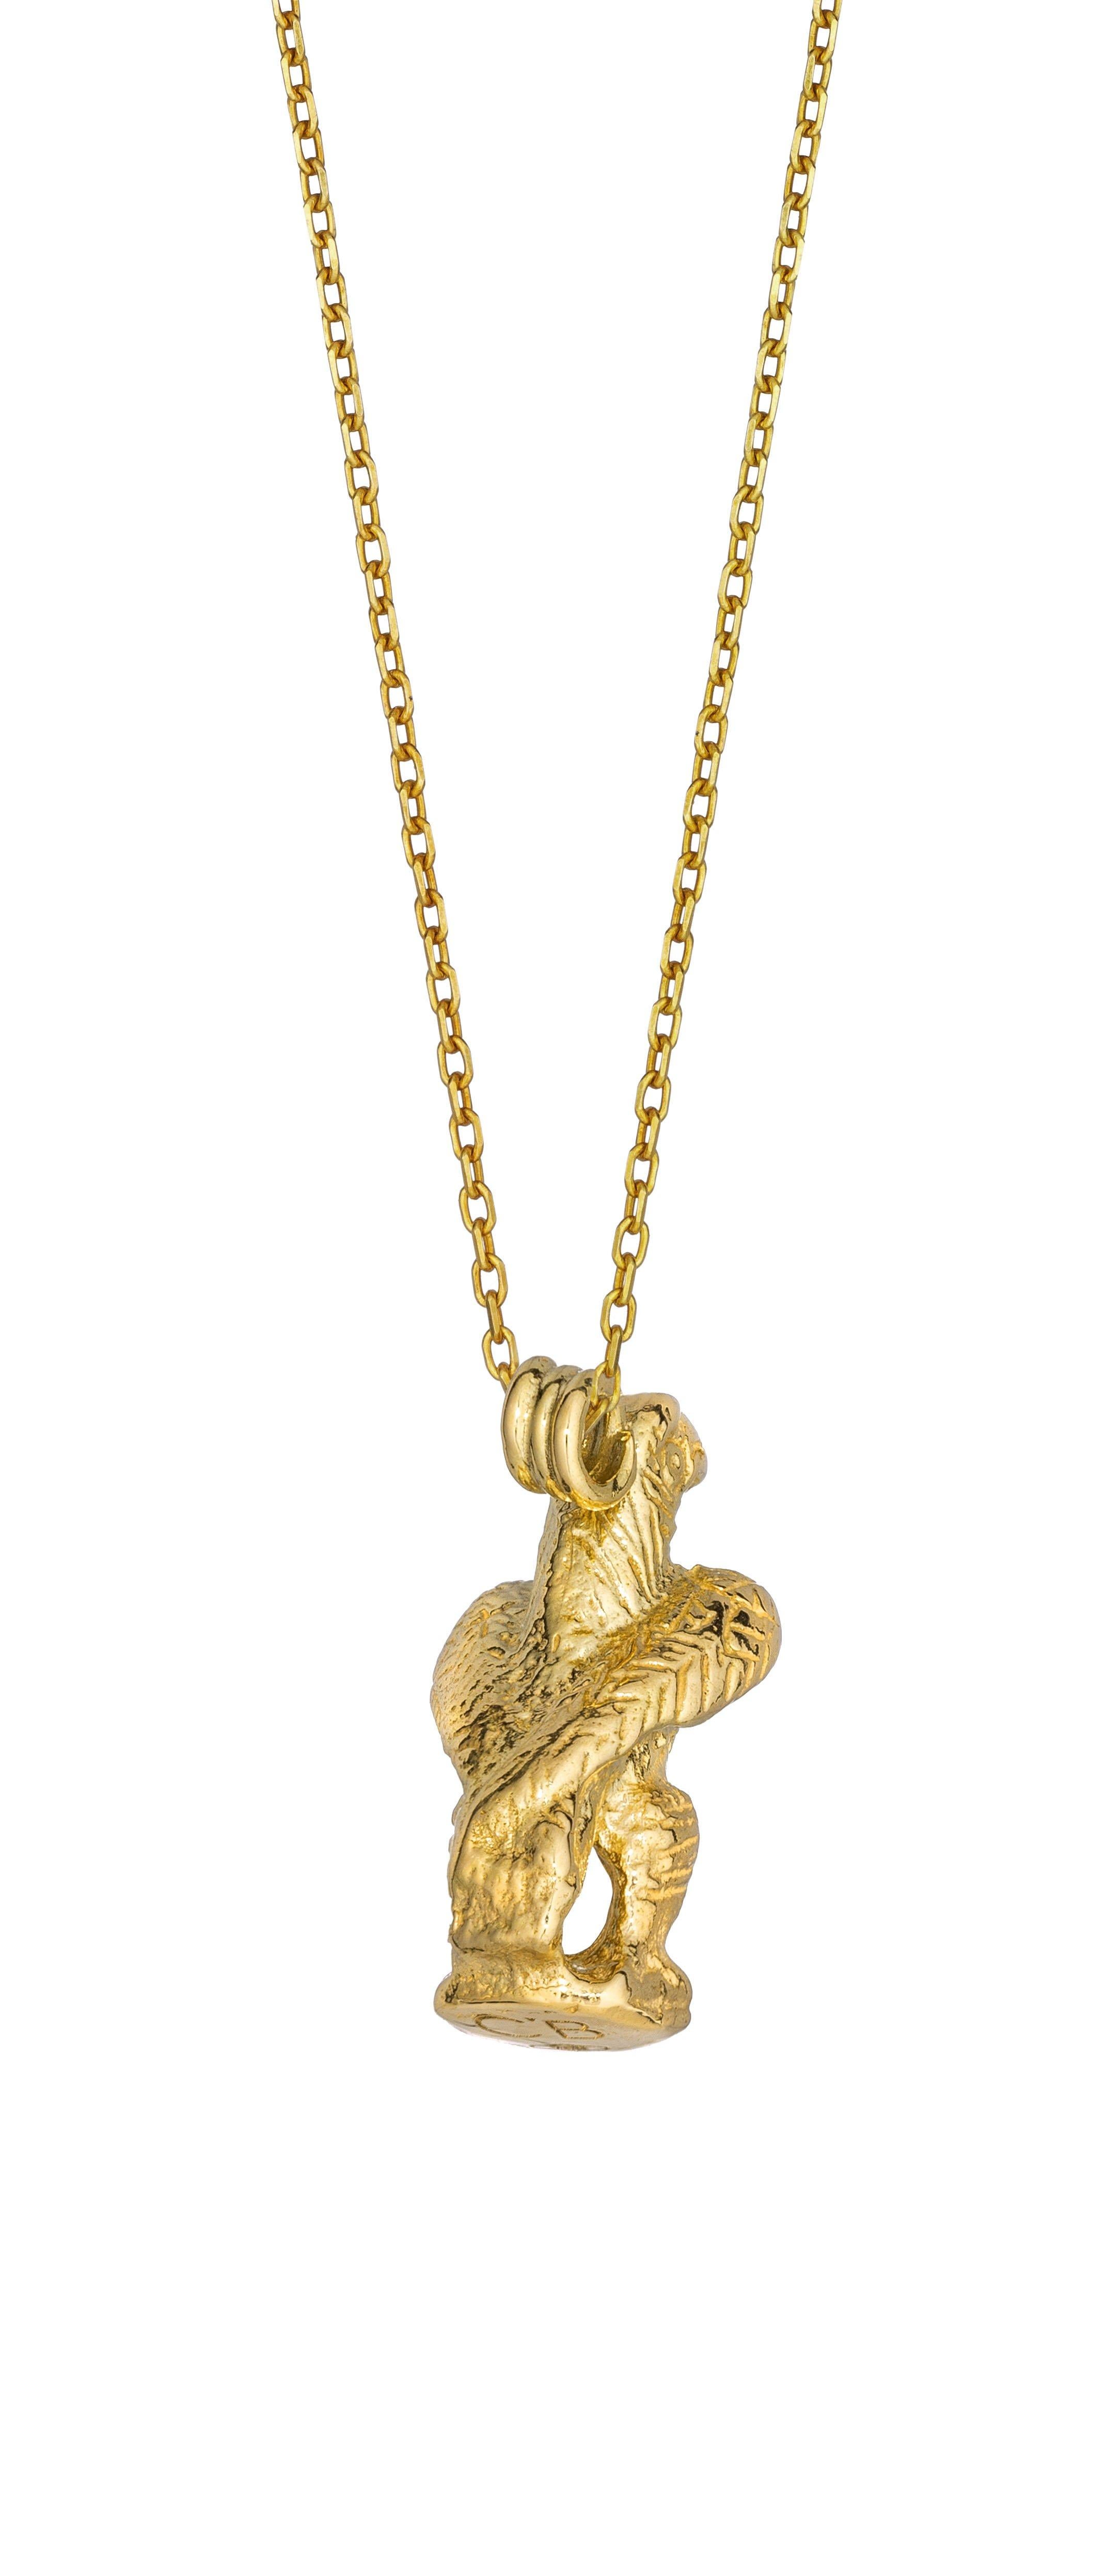 Falco Pendant, 18 Karat Yellow Gold with Sapphire
Handcrafted and individually cast in 18-karat solid yellow gold. Olivia carves each piece from wax, making these pendants unique, which we believe is what gives them their beauty.
The falcon has a